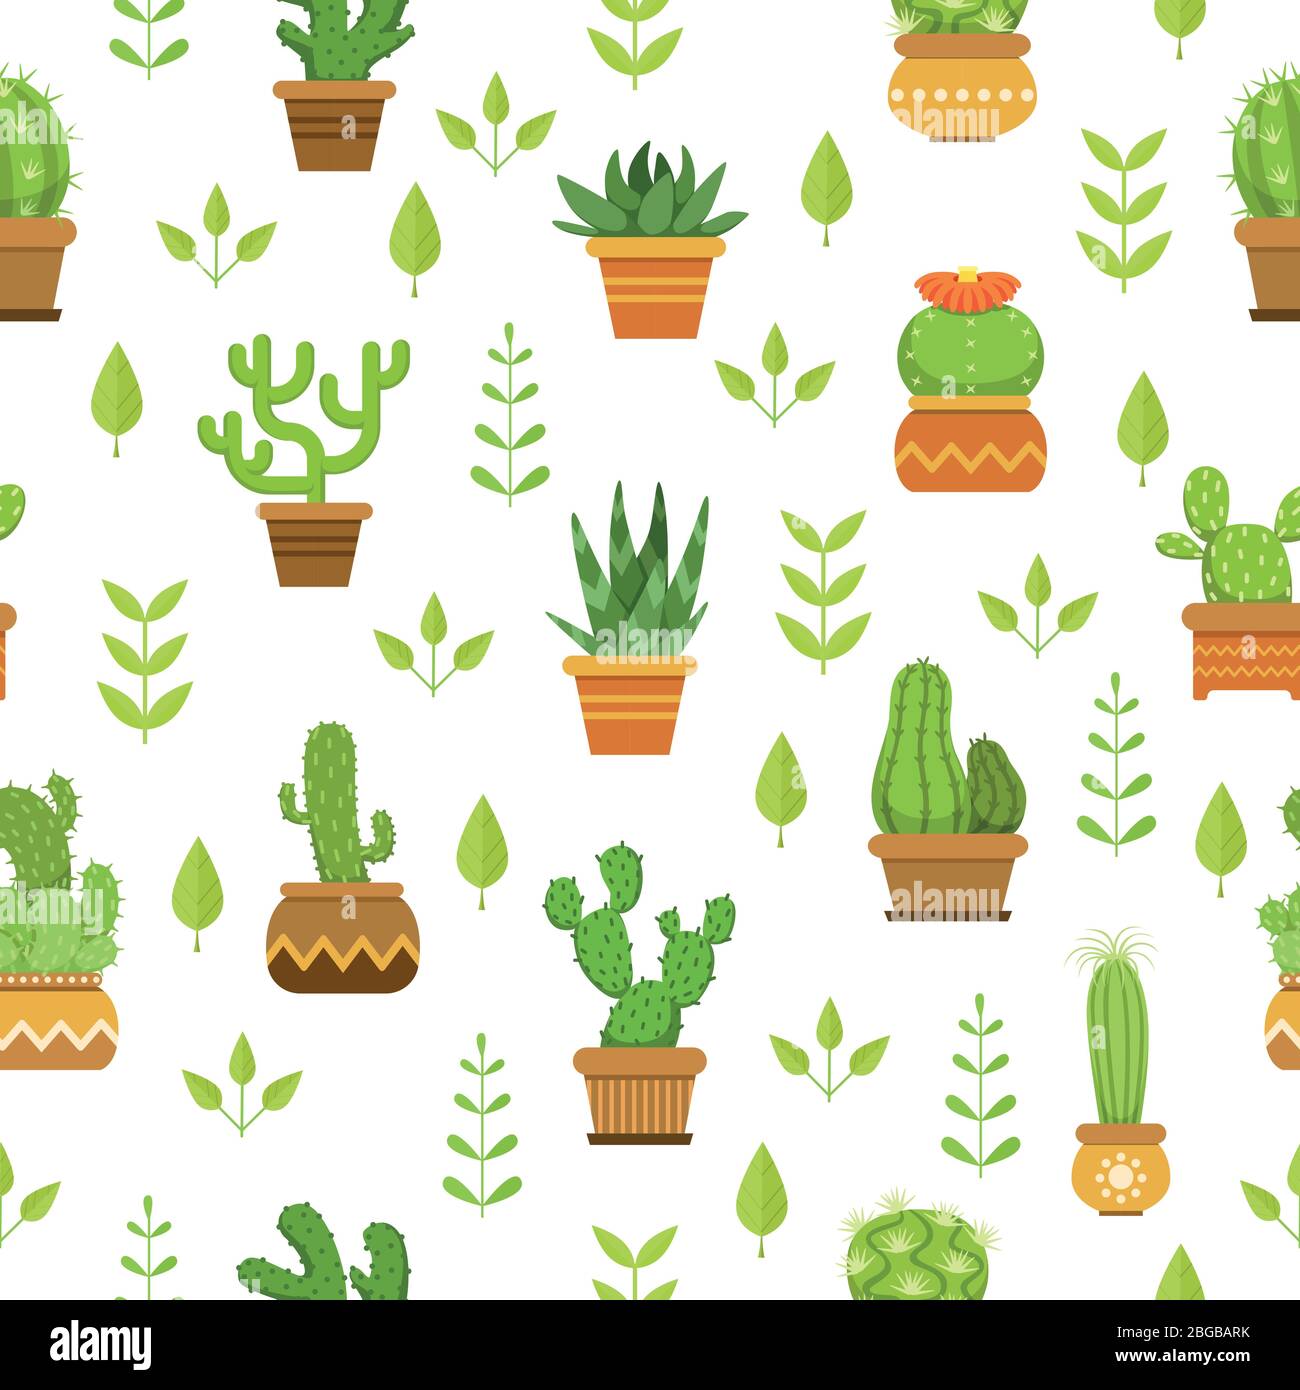 Desert plants with flowers. Cactus in pots. Vector seamless pattern Stock Vector